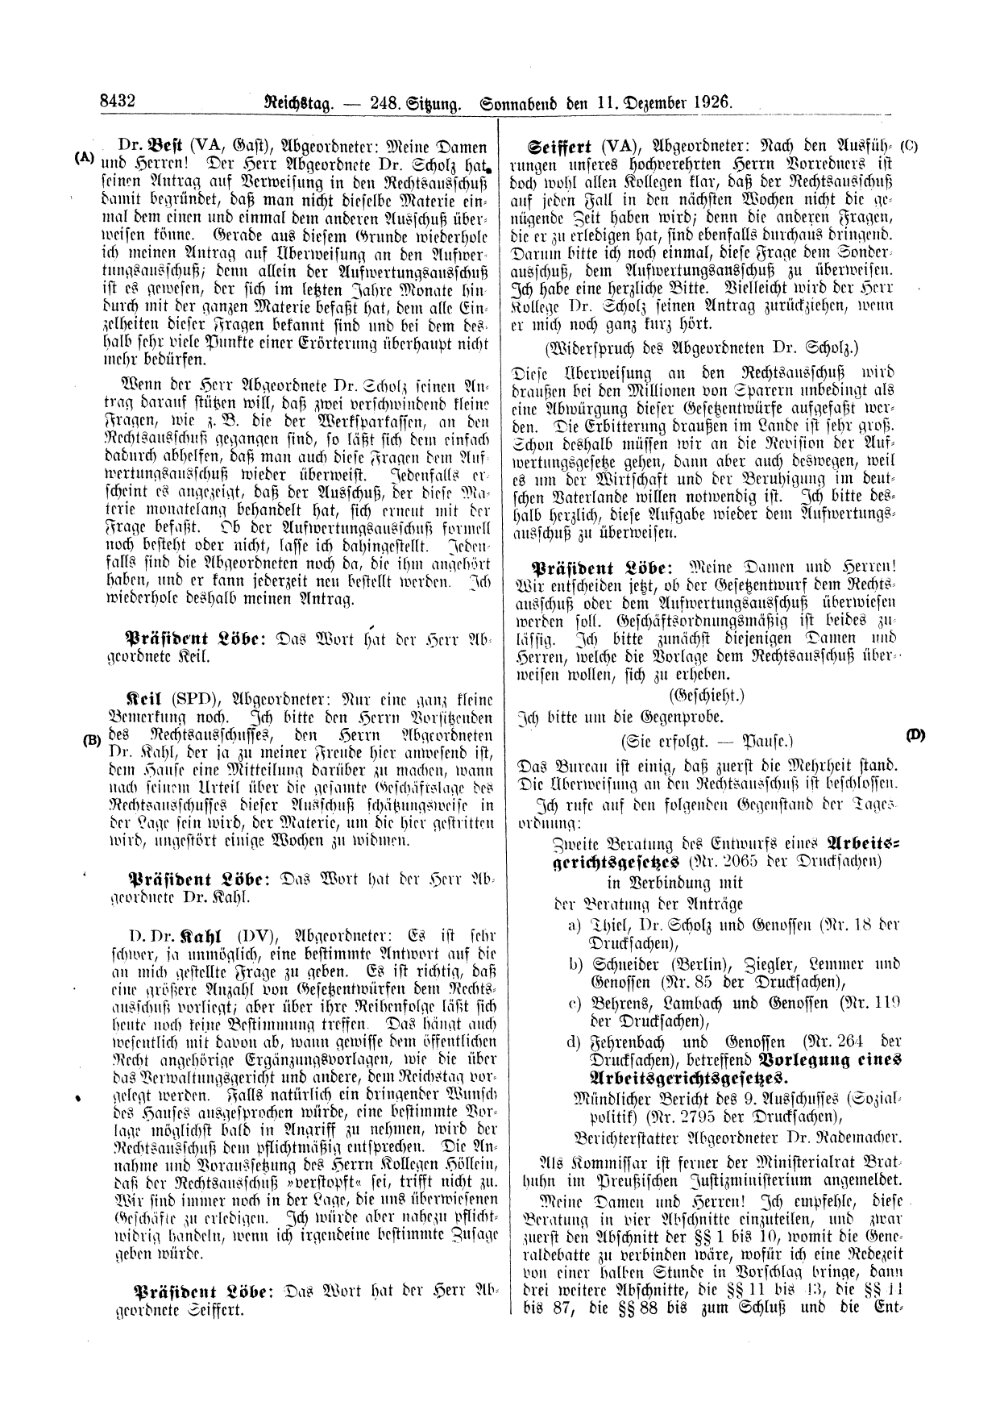 Scan of page 8432